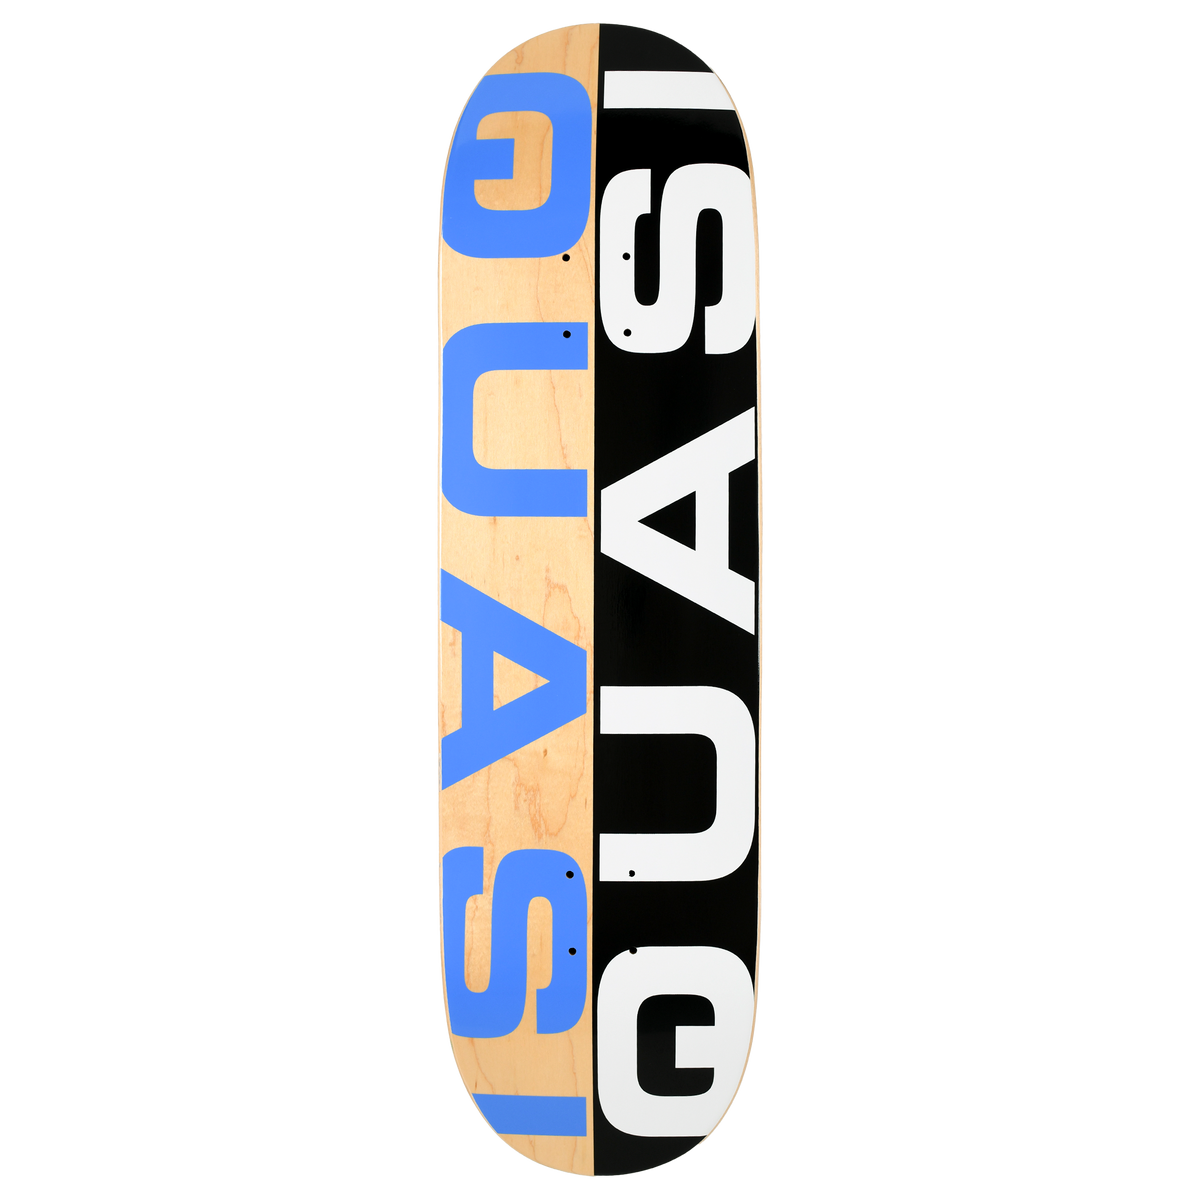 Quasi logo deck with split graphic in half, one 1/2 being wood-ply with blue Quasi graphic, and other 1/2 being black graphic with white Quasi logo.